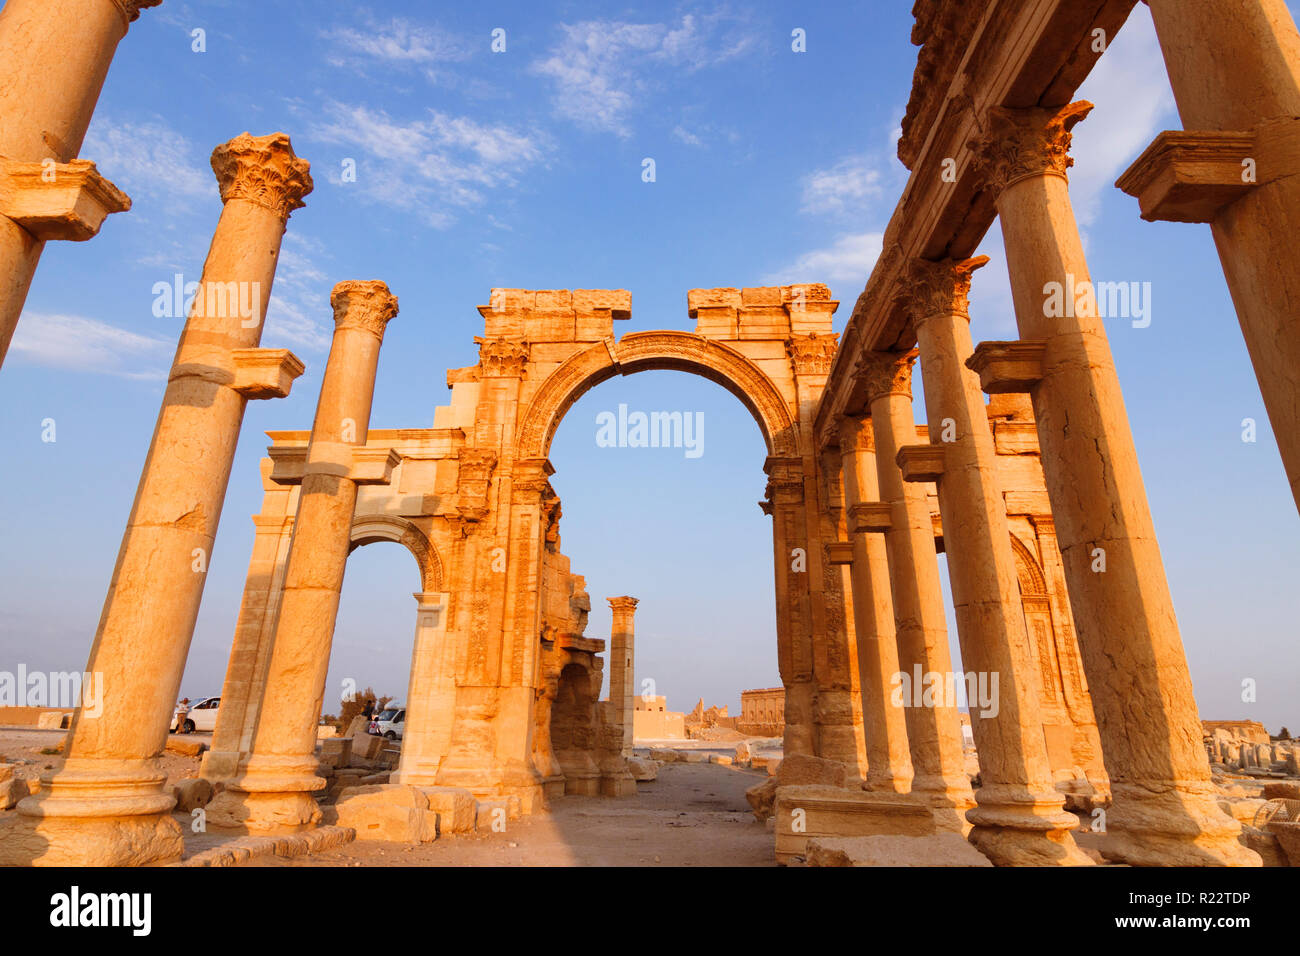 Palmyra, Homs Governorate, Syria - May 26th, 2009 : Great colonnade and 3rd  century Monumental Arch of Triumph of Palmyra, a Roman ornamental archway  Stock Photo - Alamy